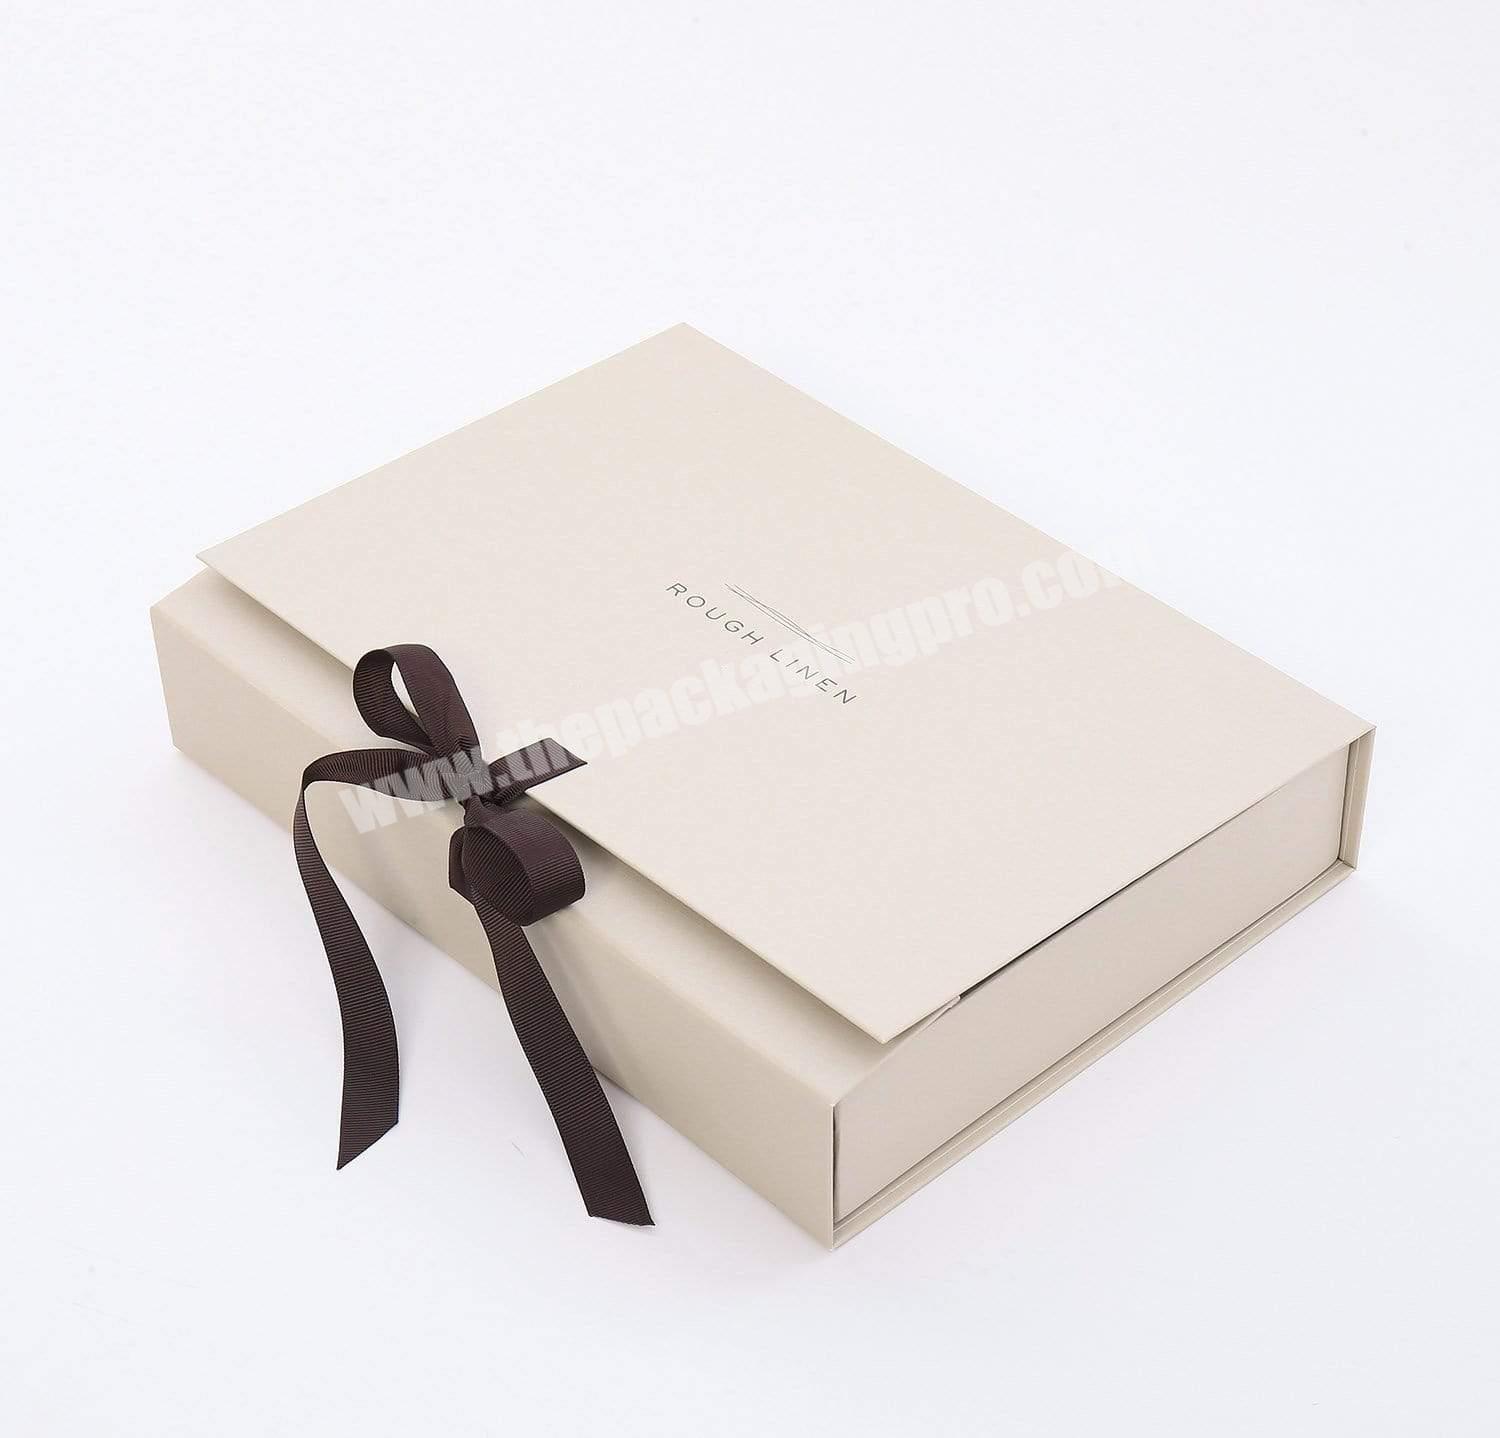 see through brush jewellery packaging boxes custom printed candle packaging boxes for shipping